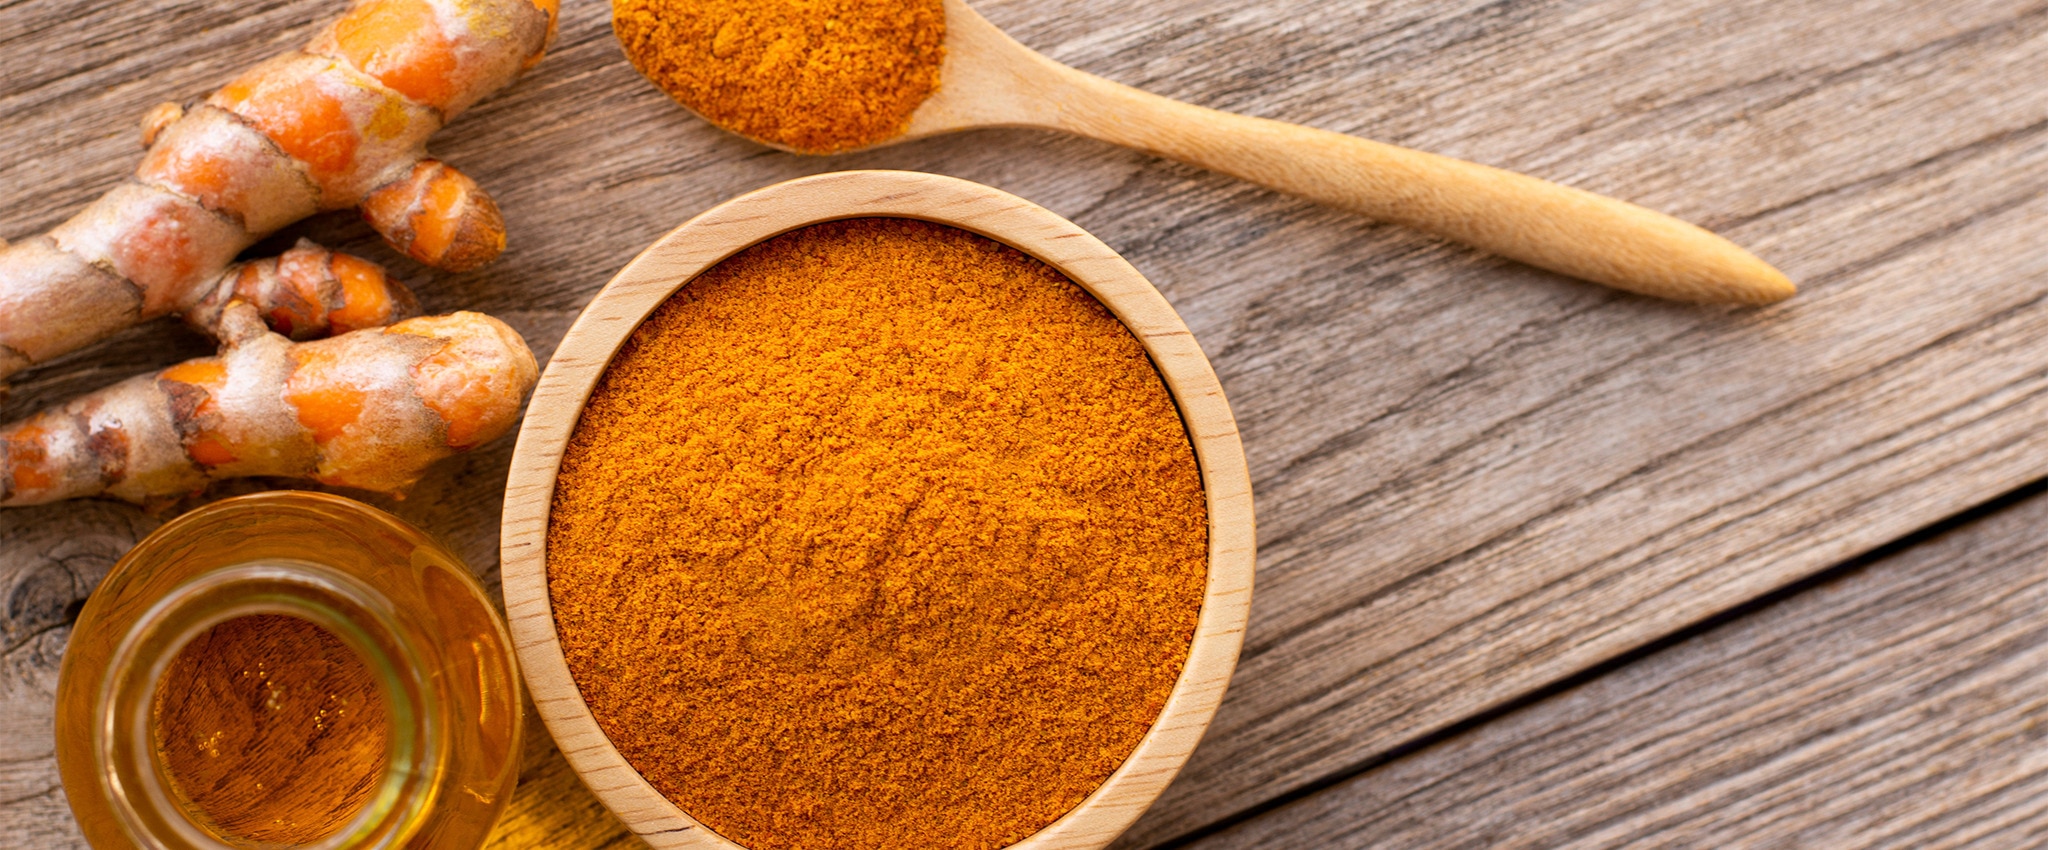 20 Benefits of Turmeric (From Toe to Hair)